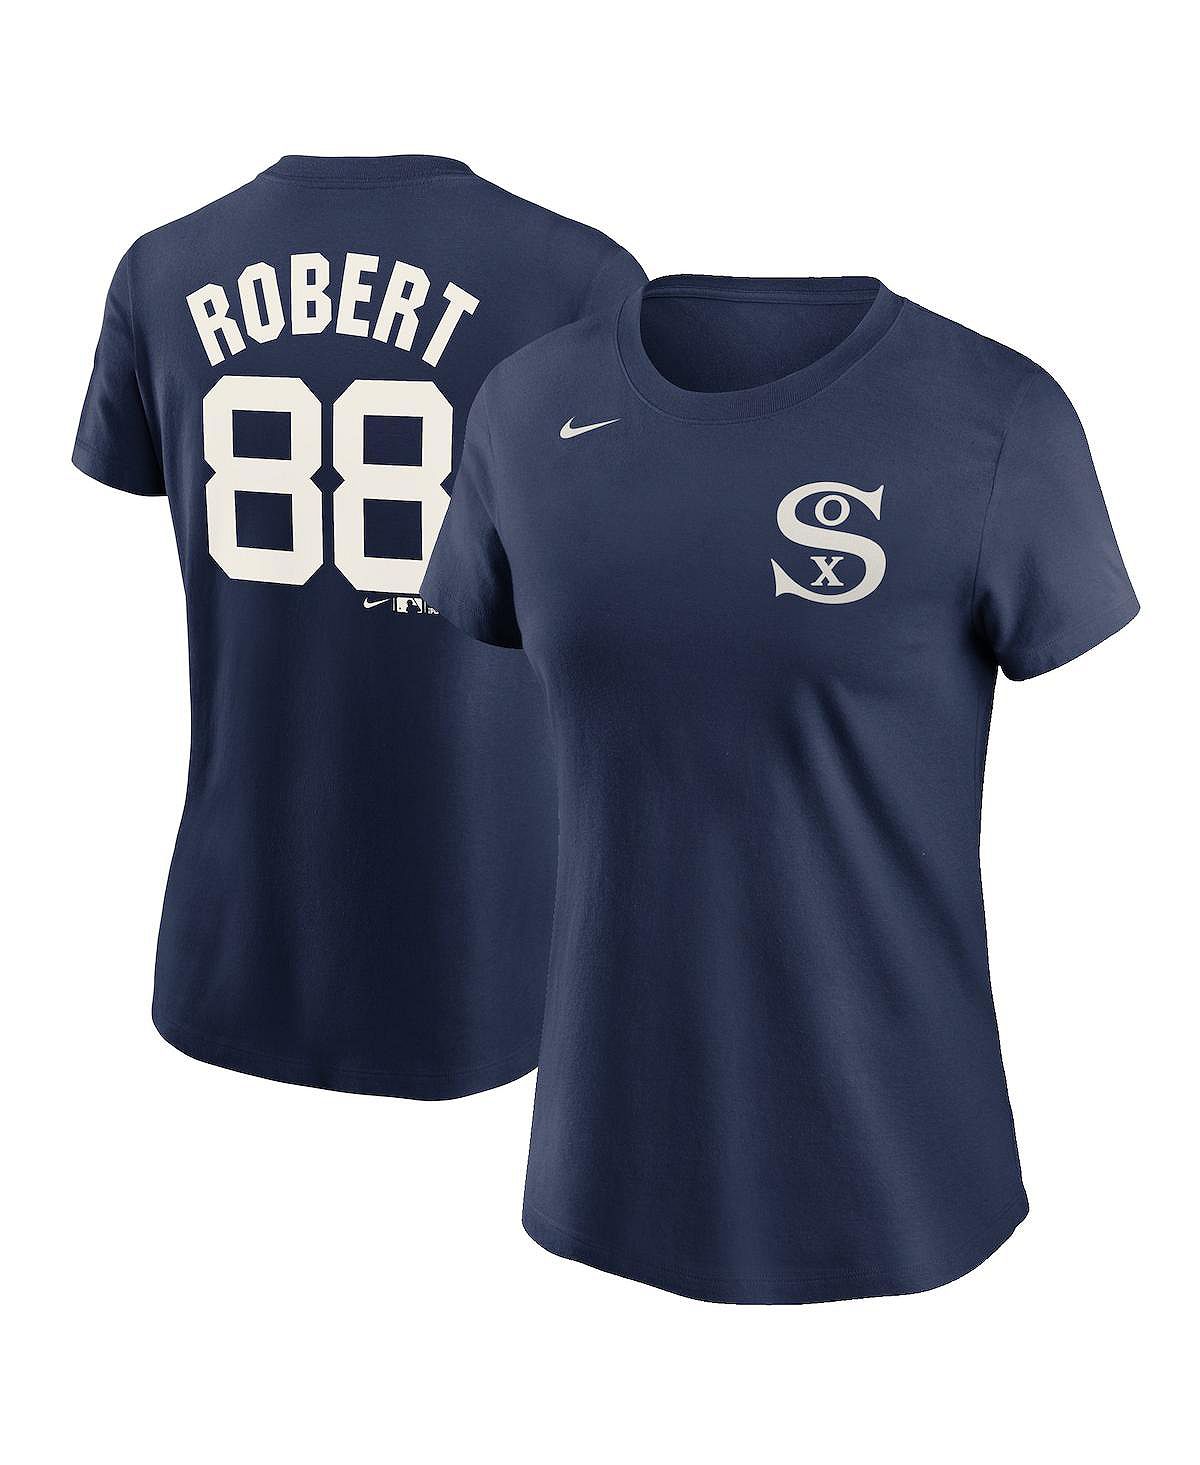 Женская футболка luis robert navy chicago white sox 2021 field of dreams name and number Nike, синий field of dreams game 2021 shirt field of dreams t shirt men is this heaven